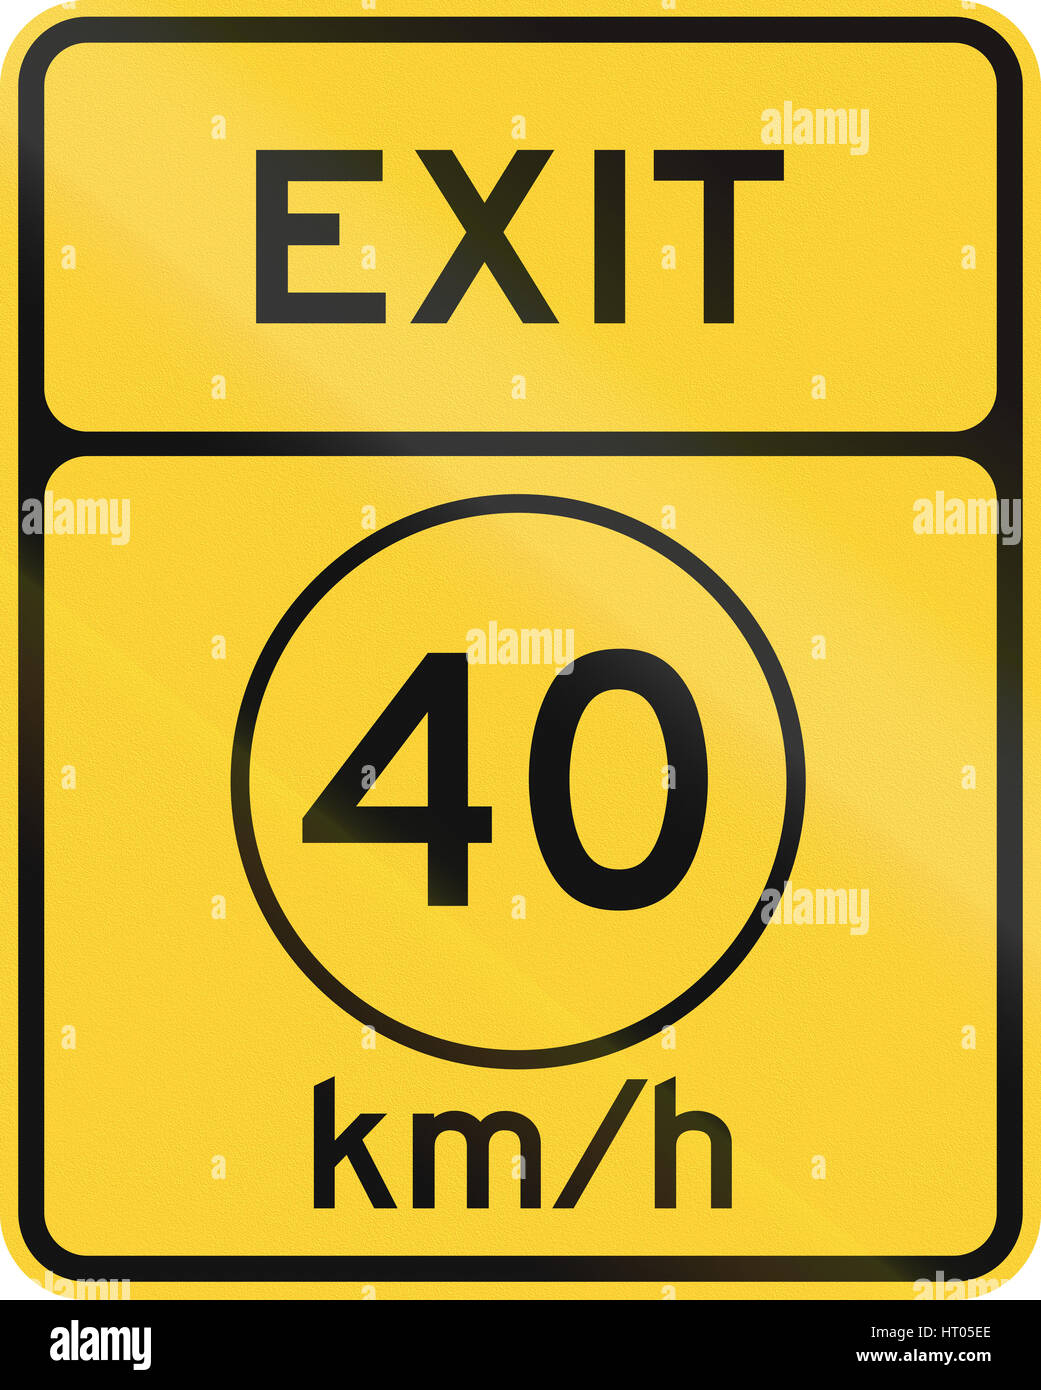 40 kmh speed limit Royalty Free Vector Image - VectorStock